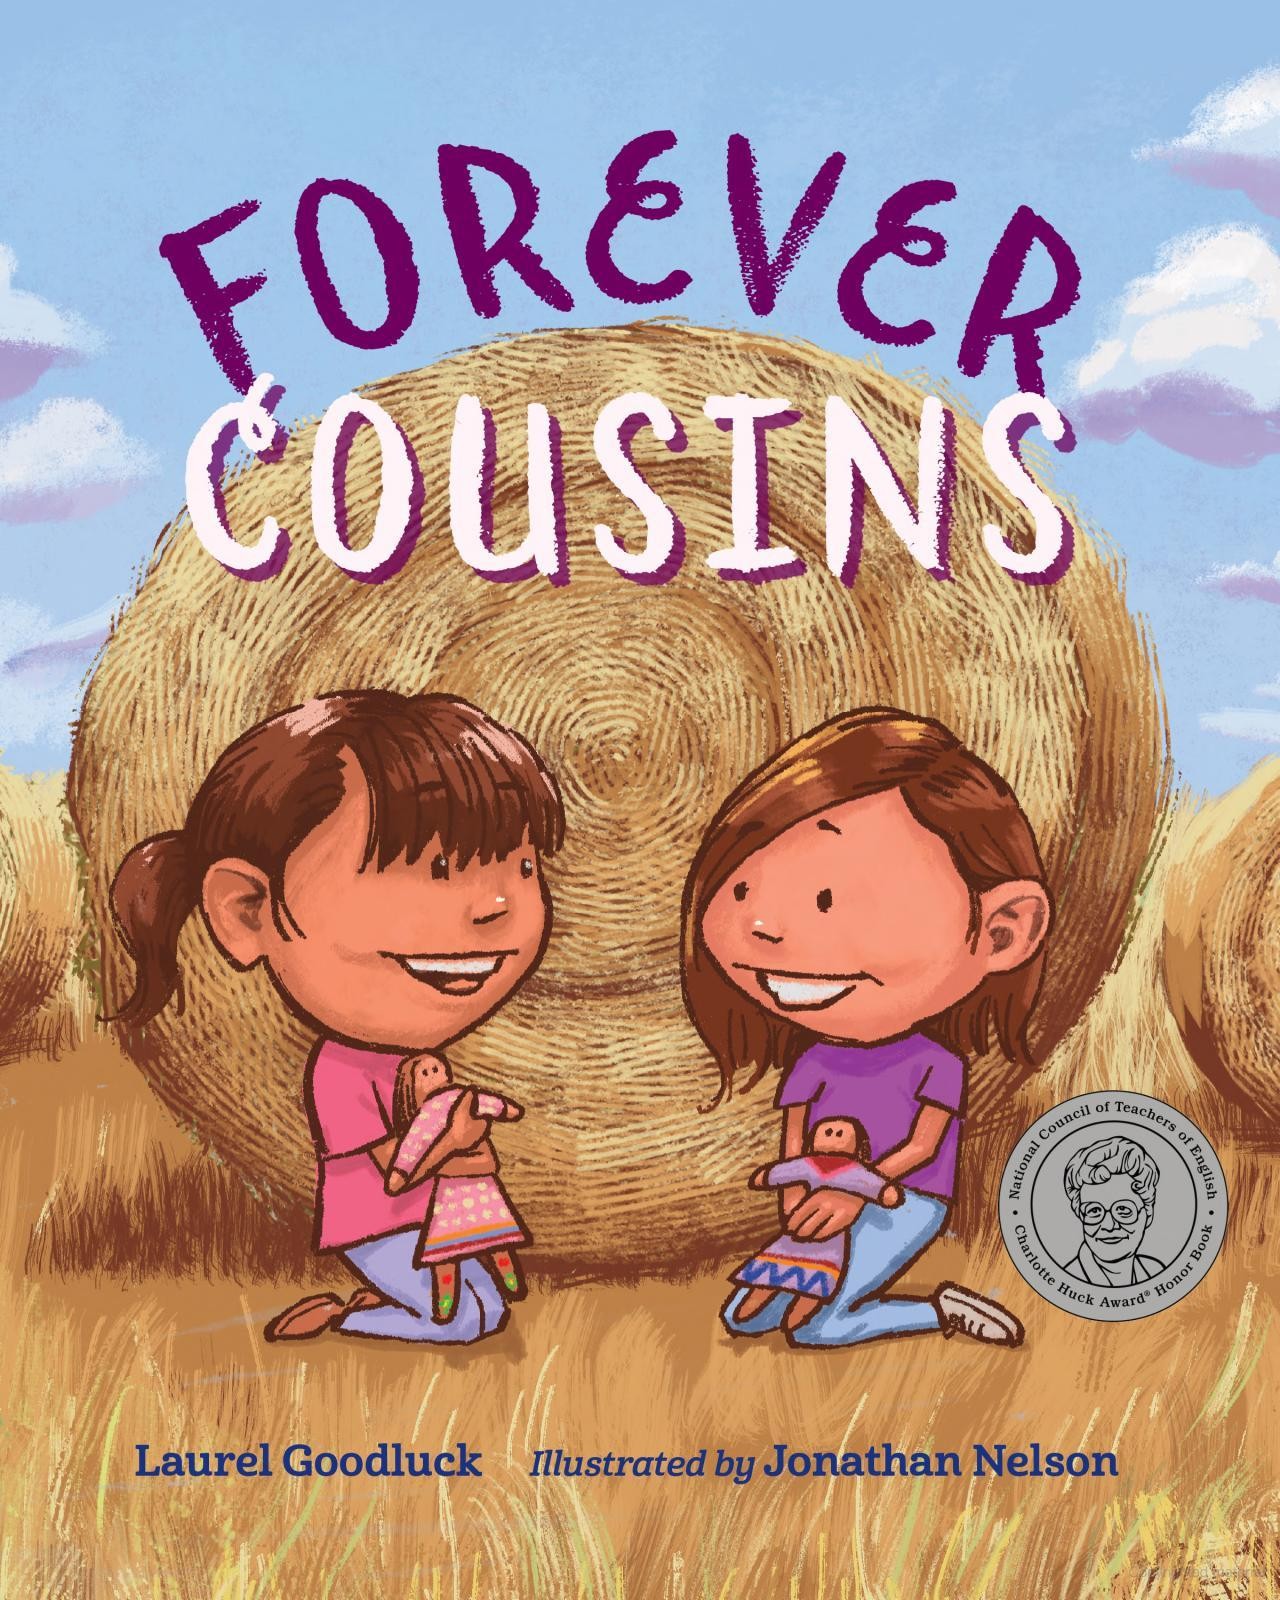 FOREVER COUSINS by Laurel Goodluck